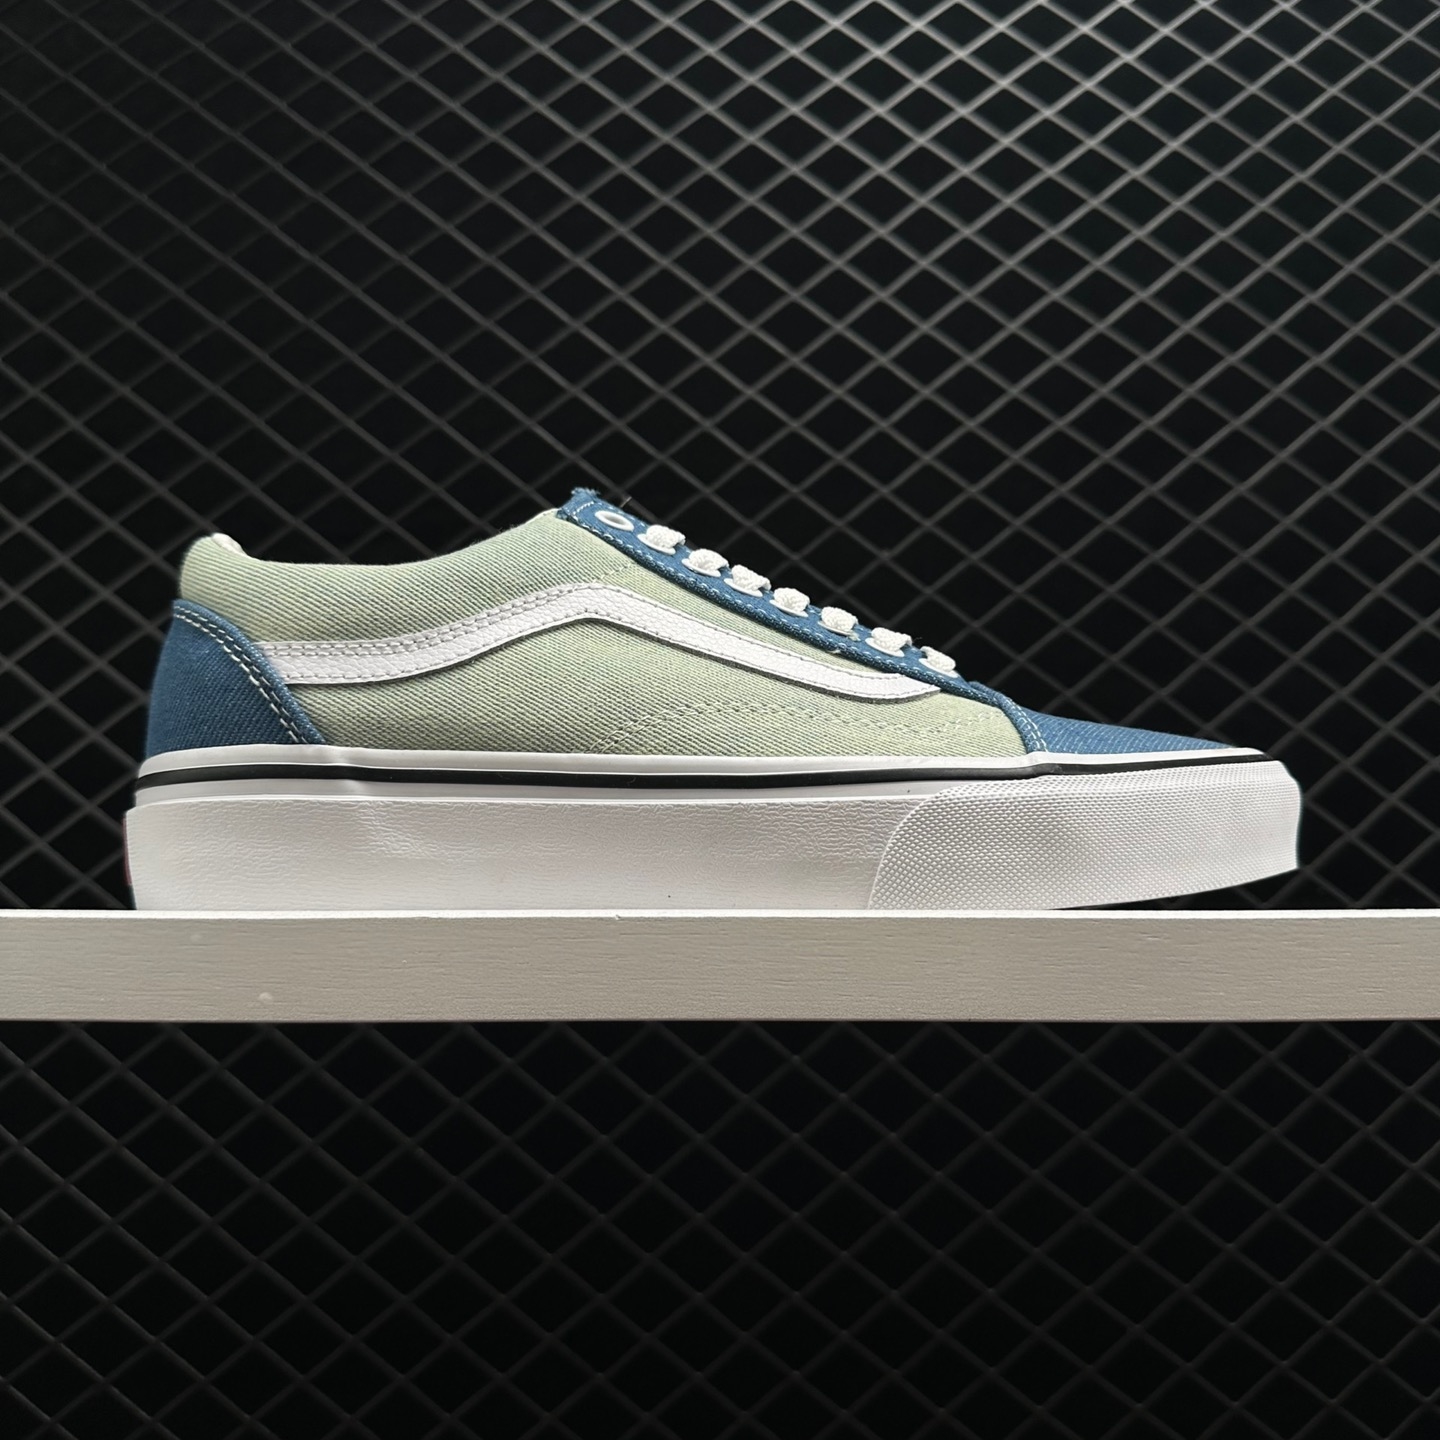 Vans Old Skool 36 DX Gray Green White - Stylish and Classic Footwear